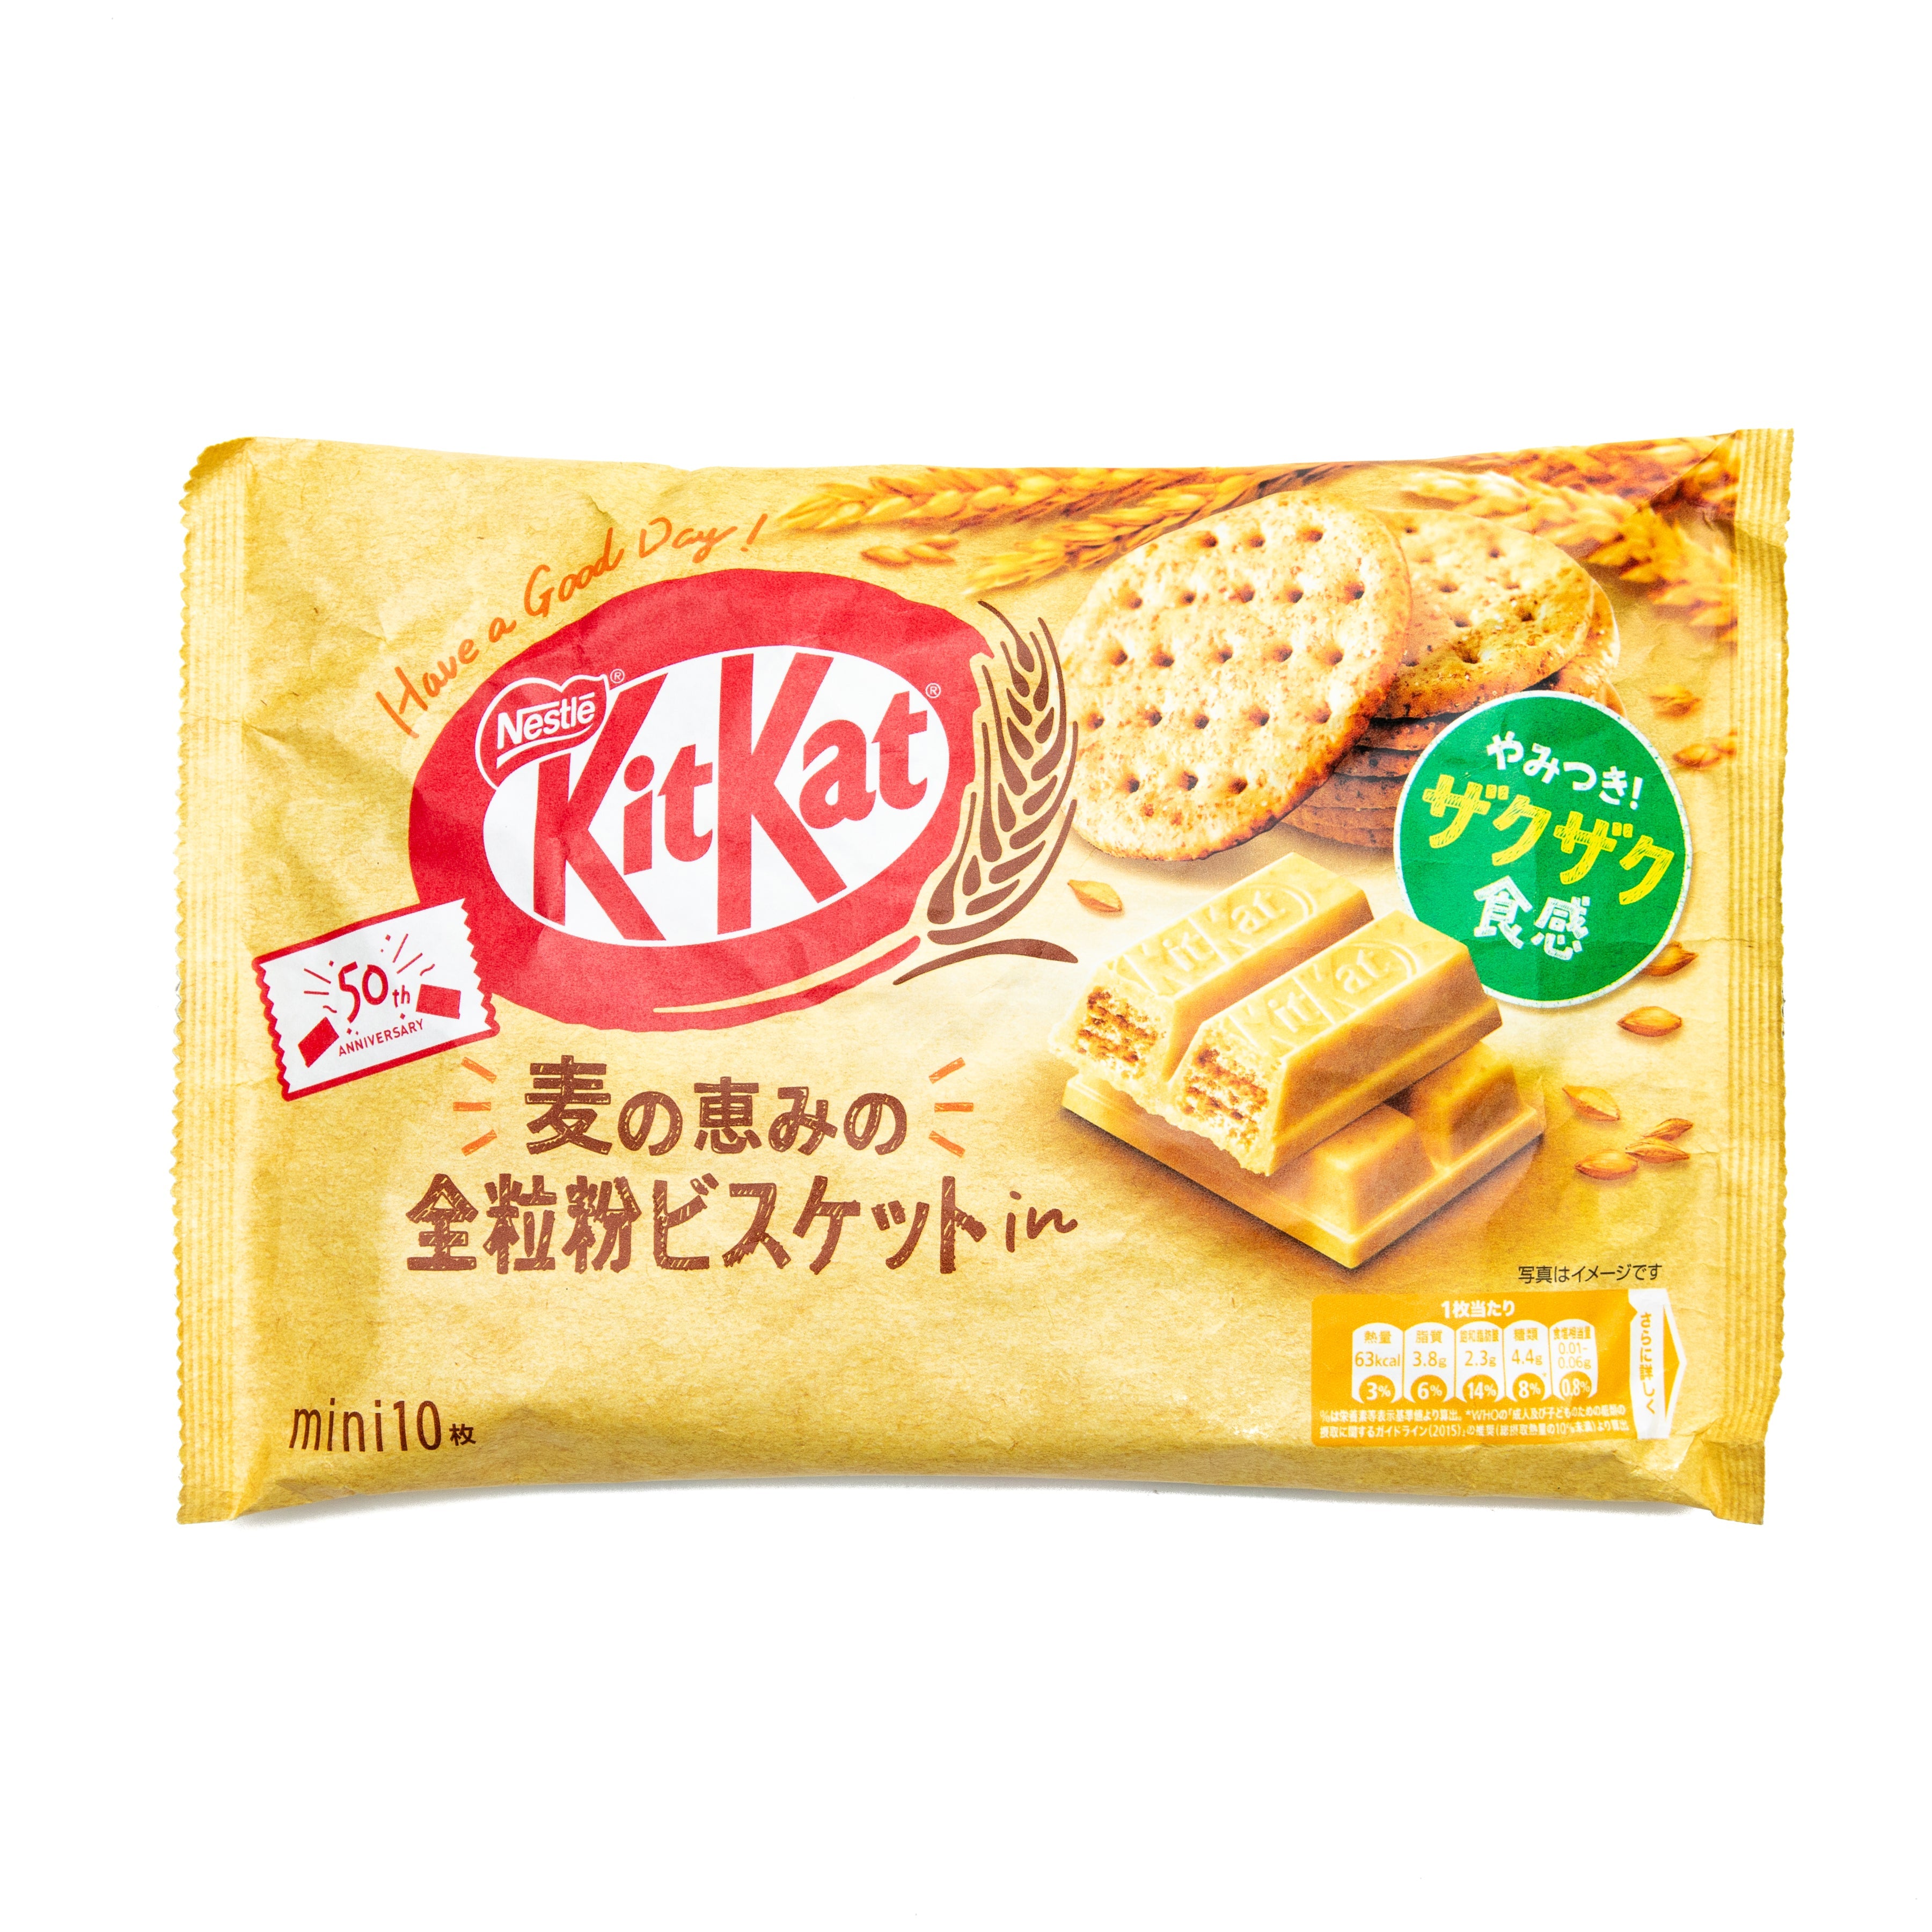 Shop NESTLE Kitkat Whole Wheat Chocolate Wafer Bar 126g/12p online at ...